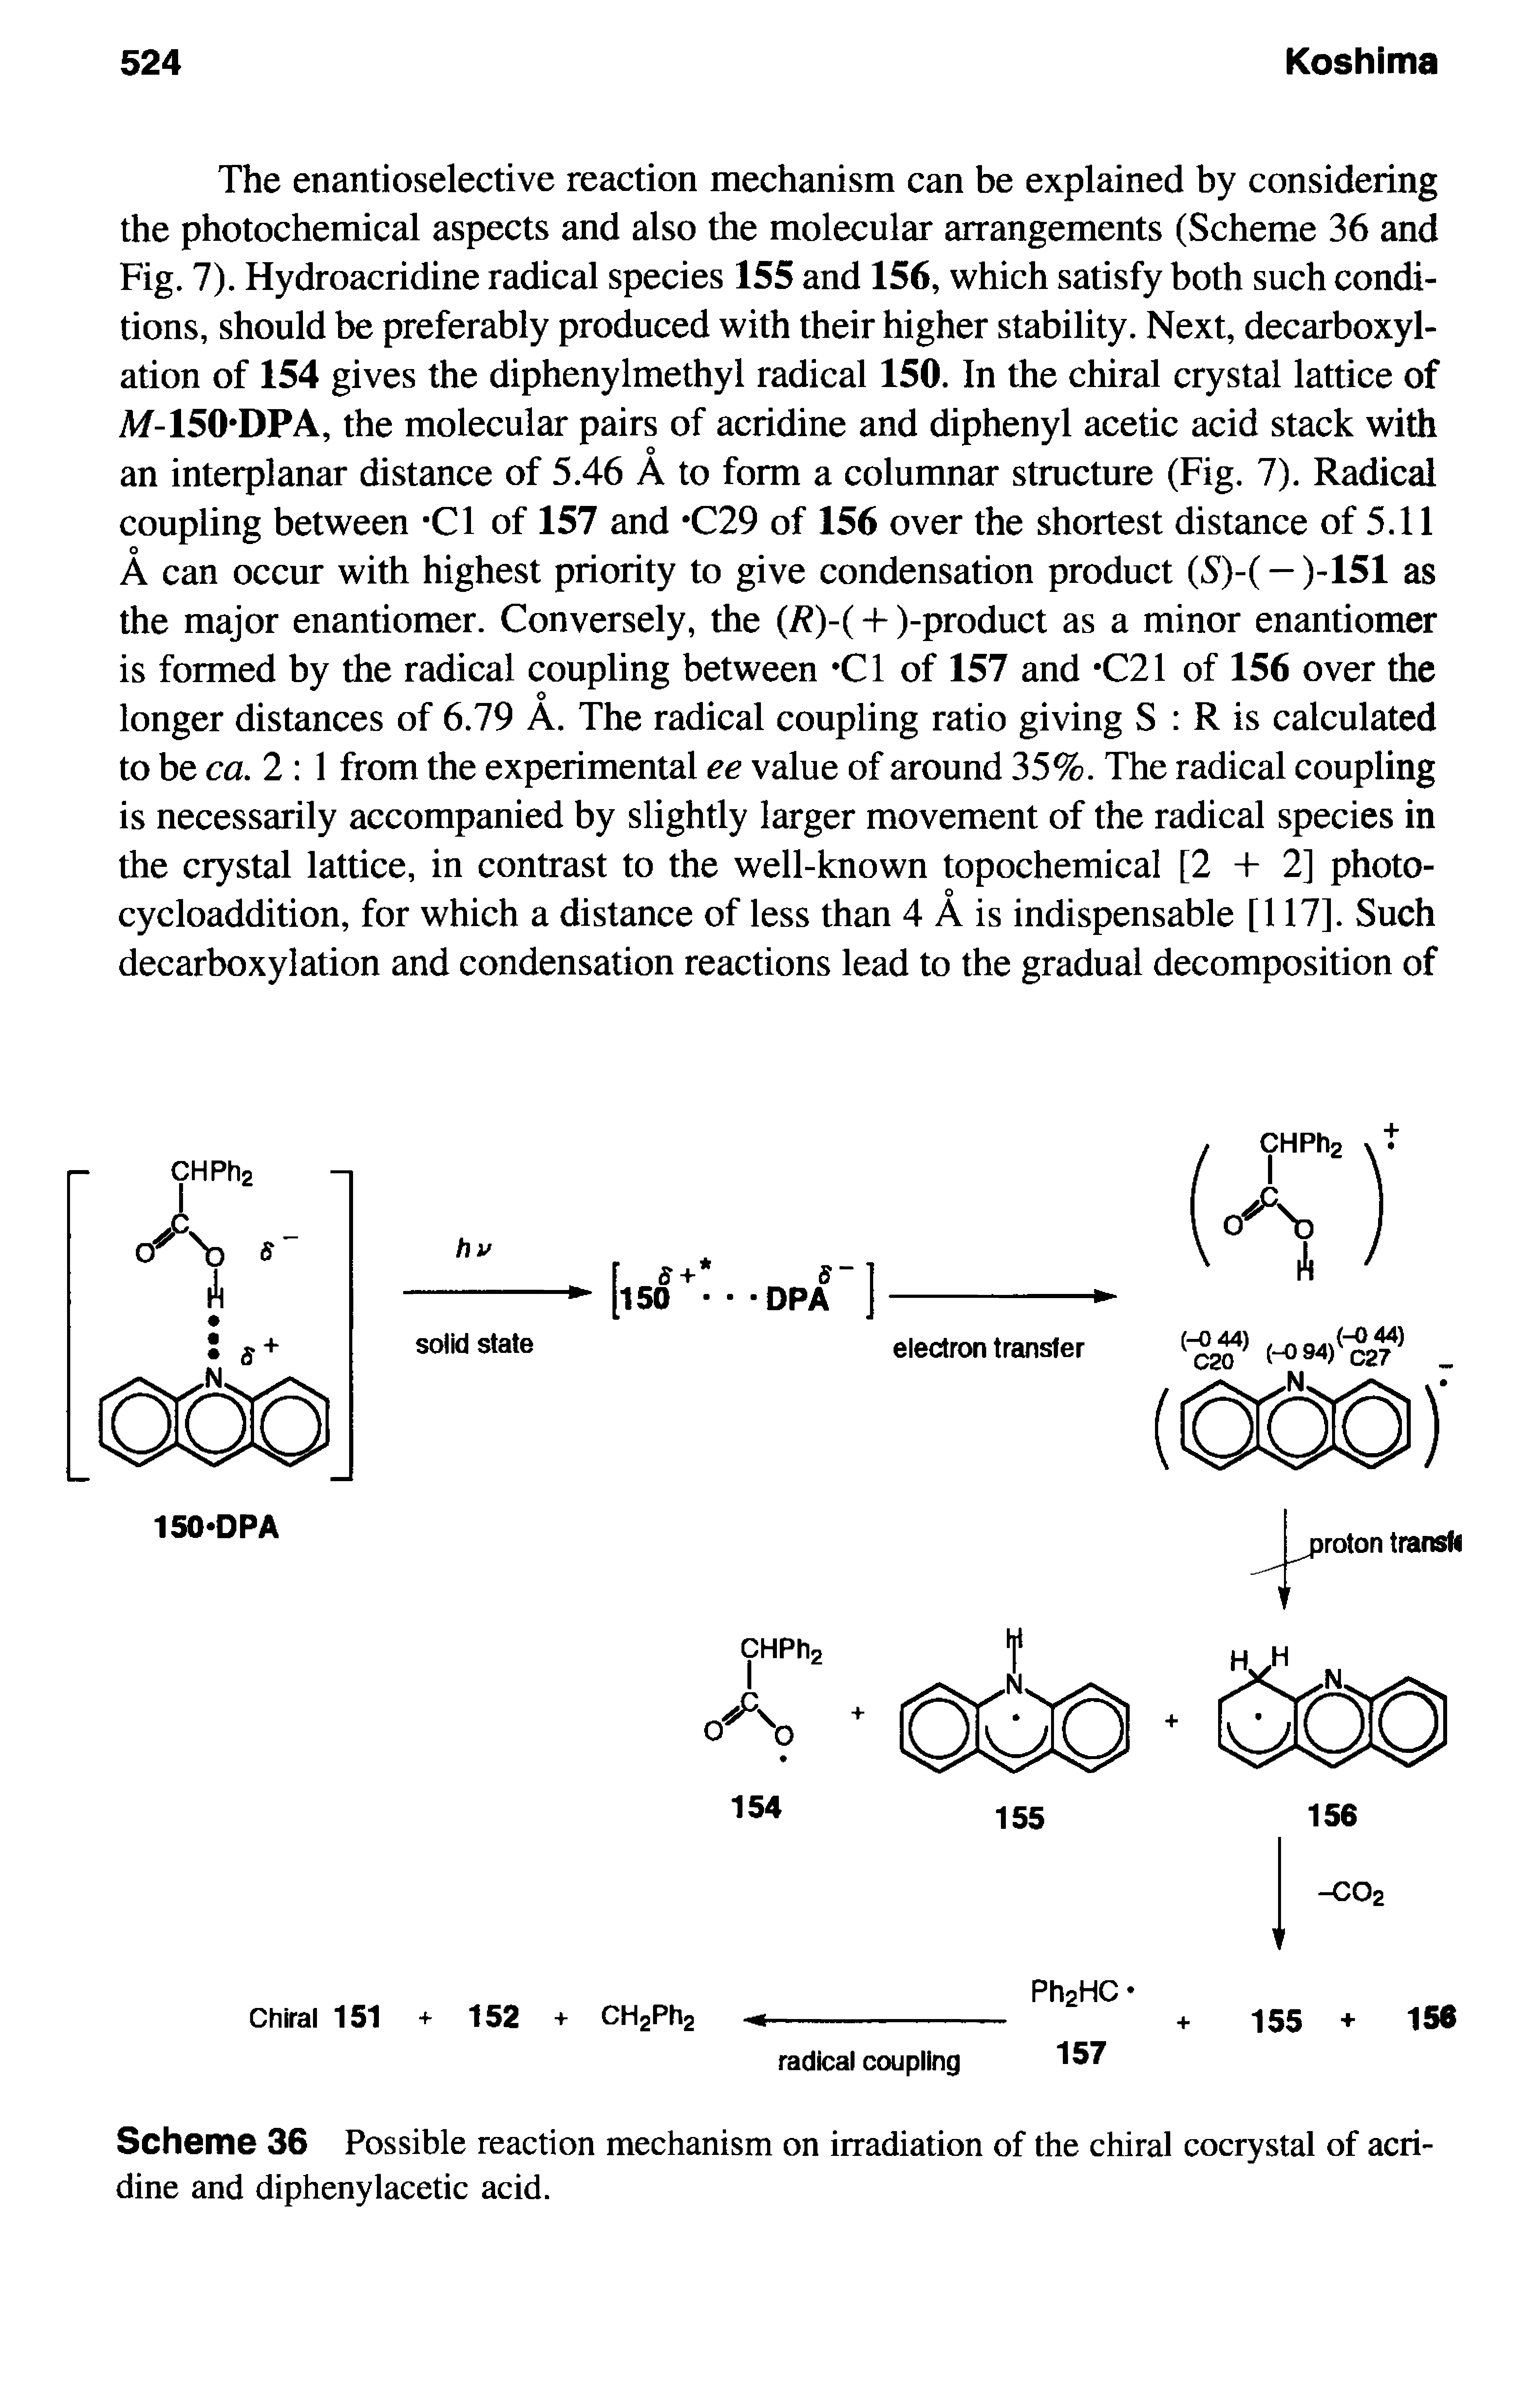 Scheme 36 Possible reaction mechanism on irradiation of the chiral cocrystal of acridine and diphenylacetic acid.